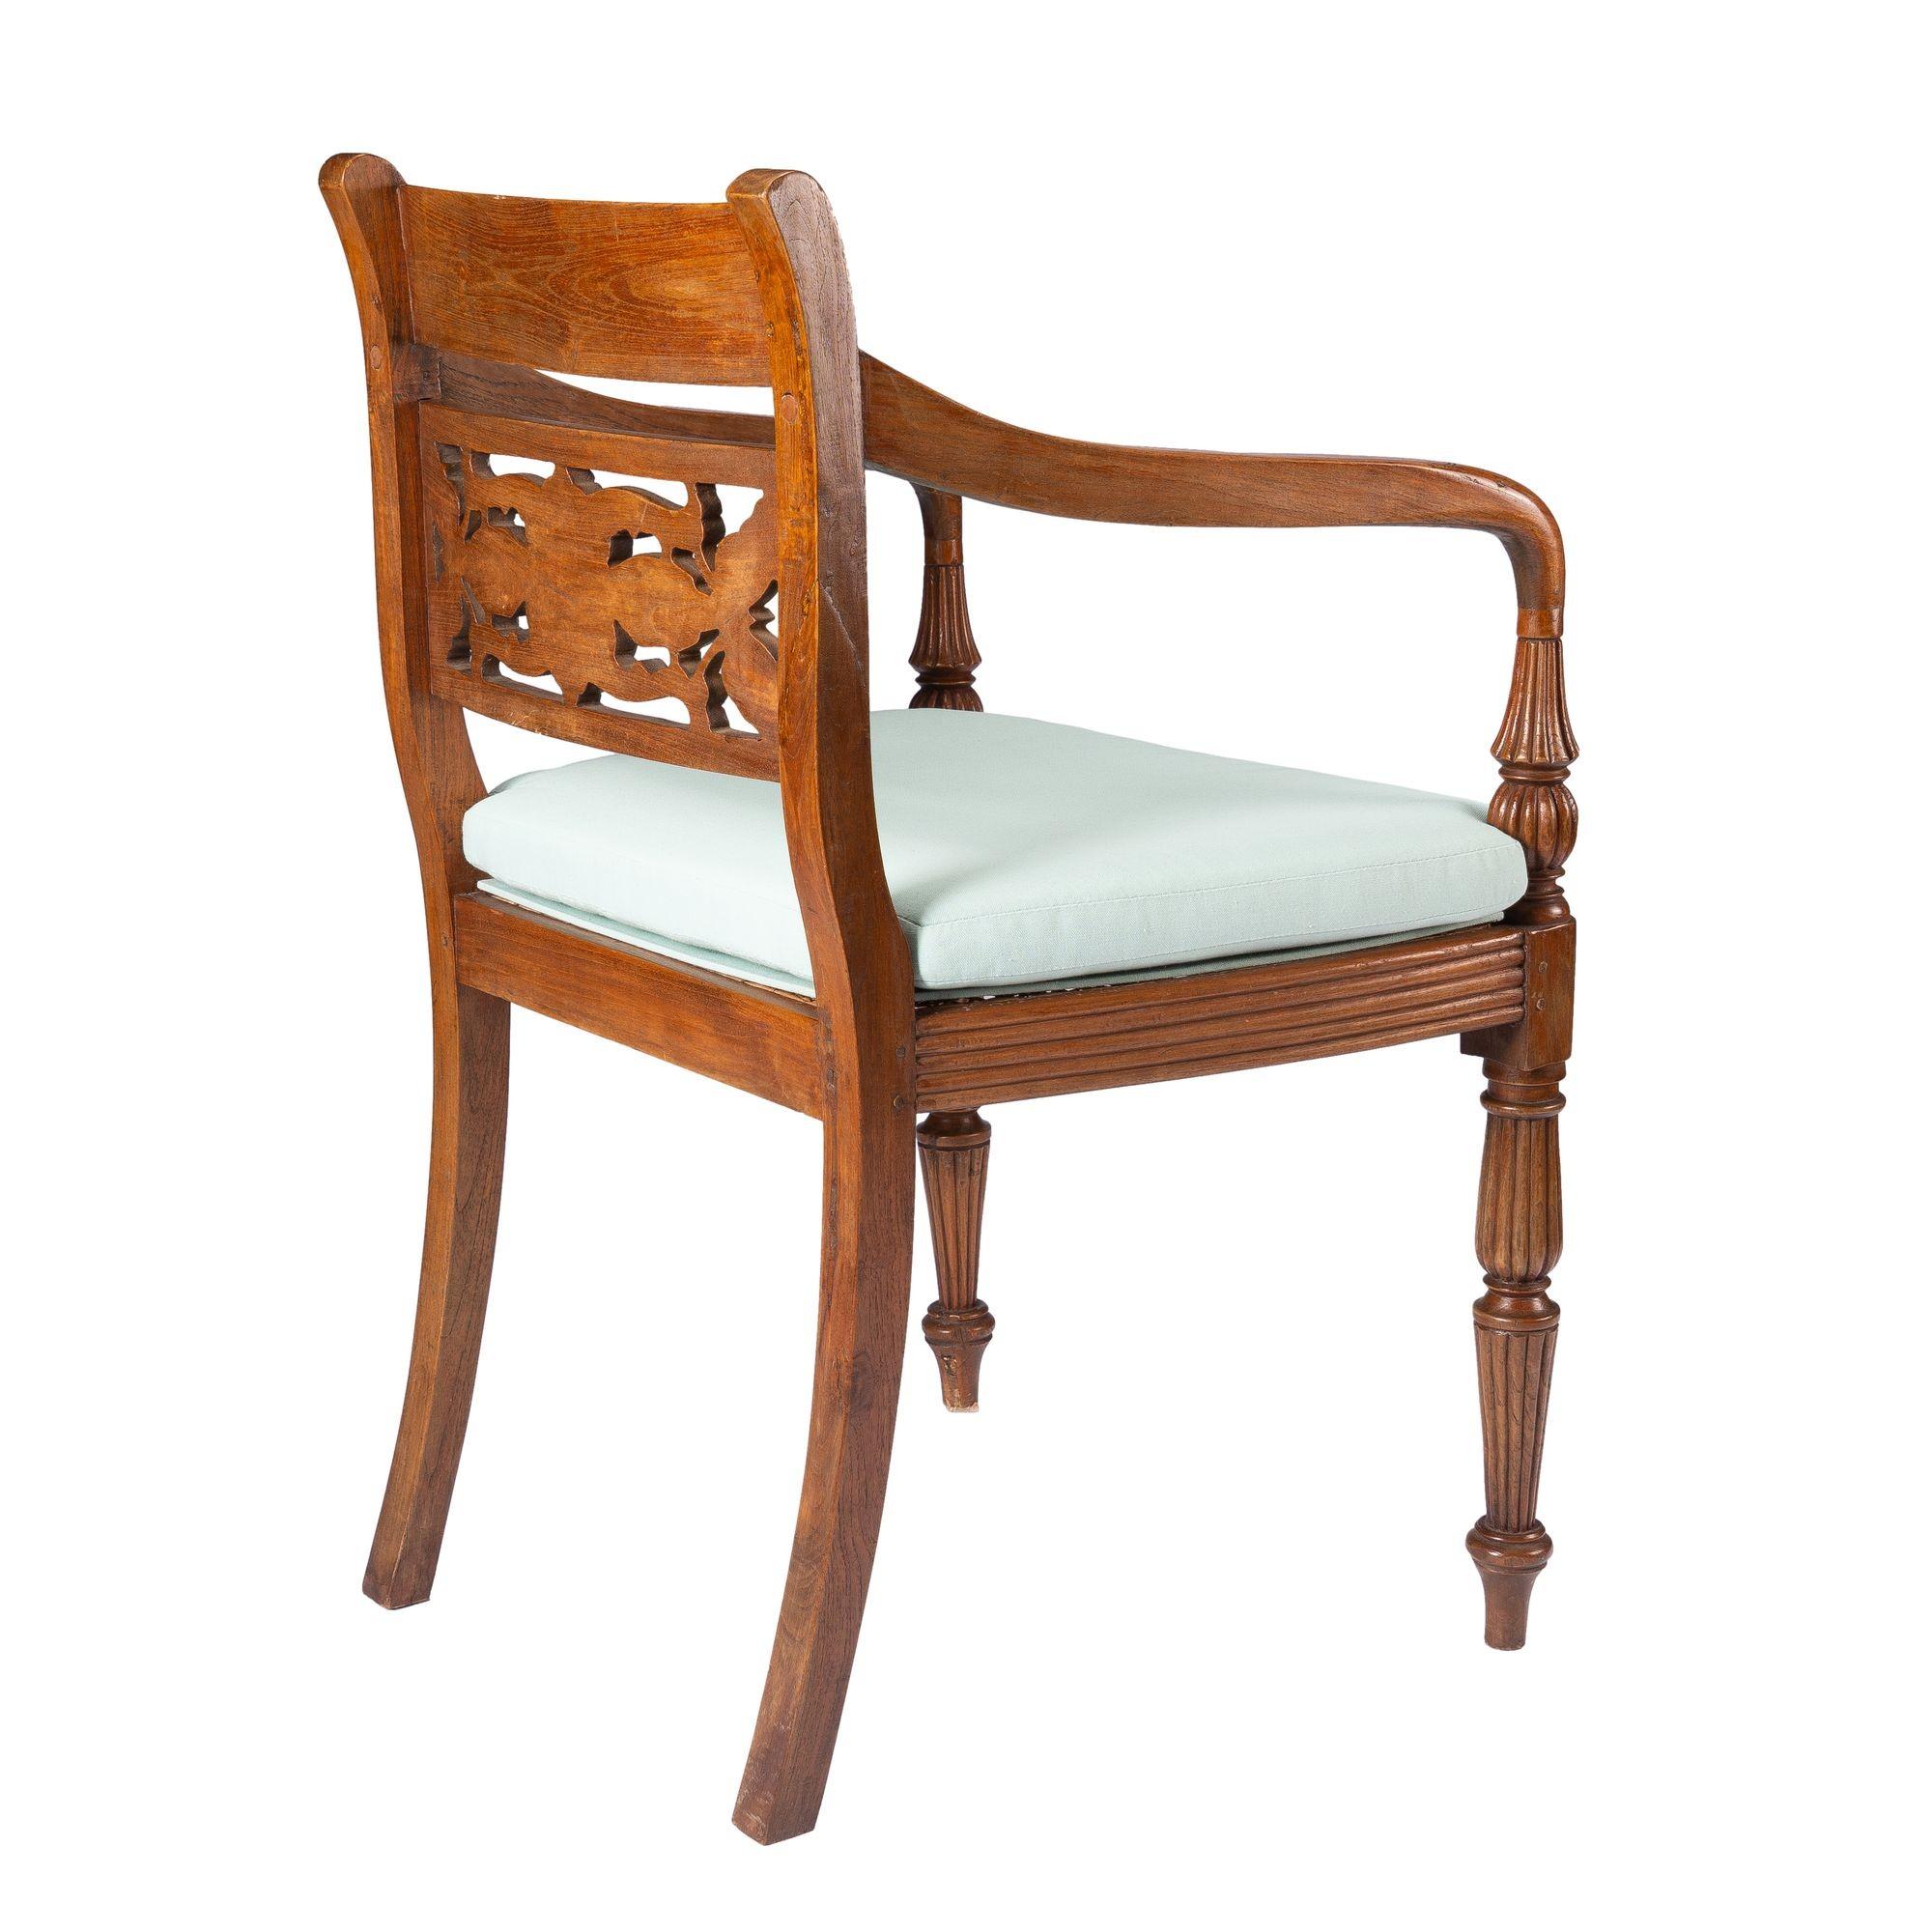 20th Century Anglo-Indian teak arm chair with caned seat and cushion, 1900-50